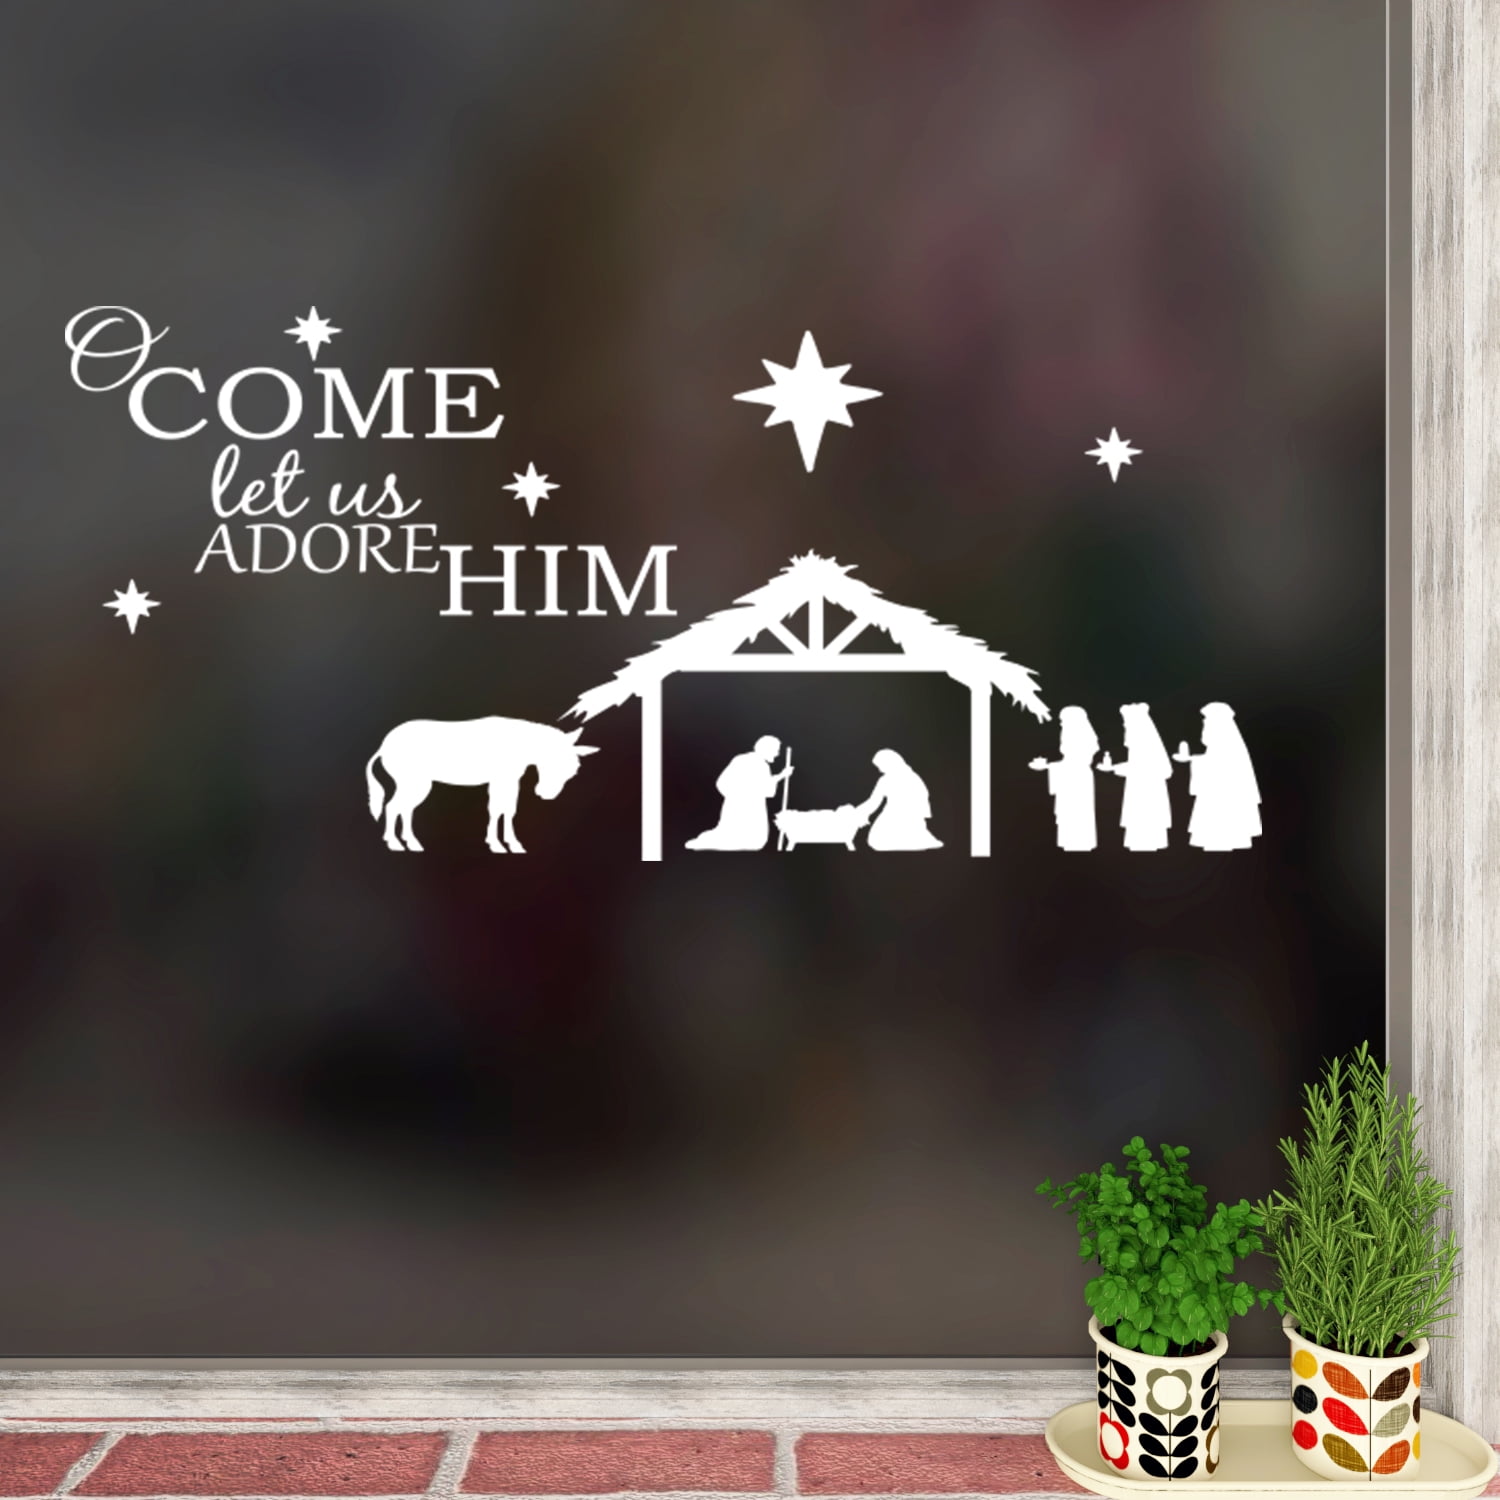 Nativity Decal Car Nativity Wall Decal Christmas Decal Christmas Nativity Car Decal Nativity Window Decal Christmas Wall Decoration